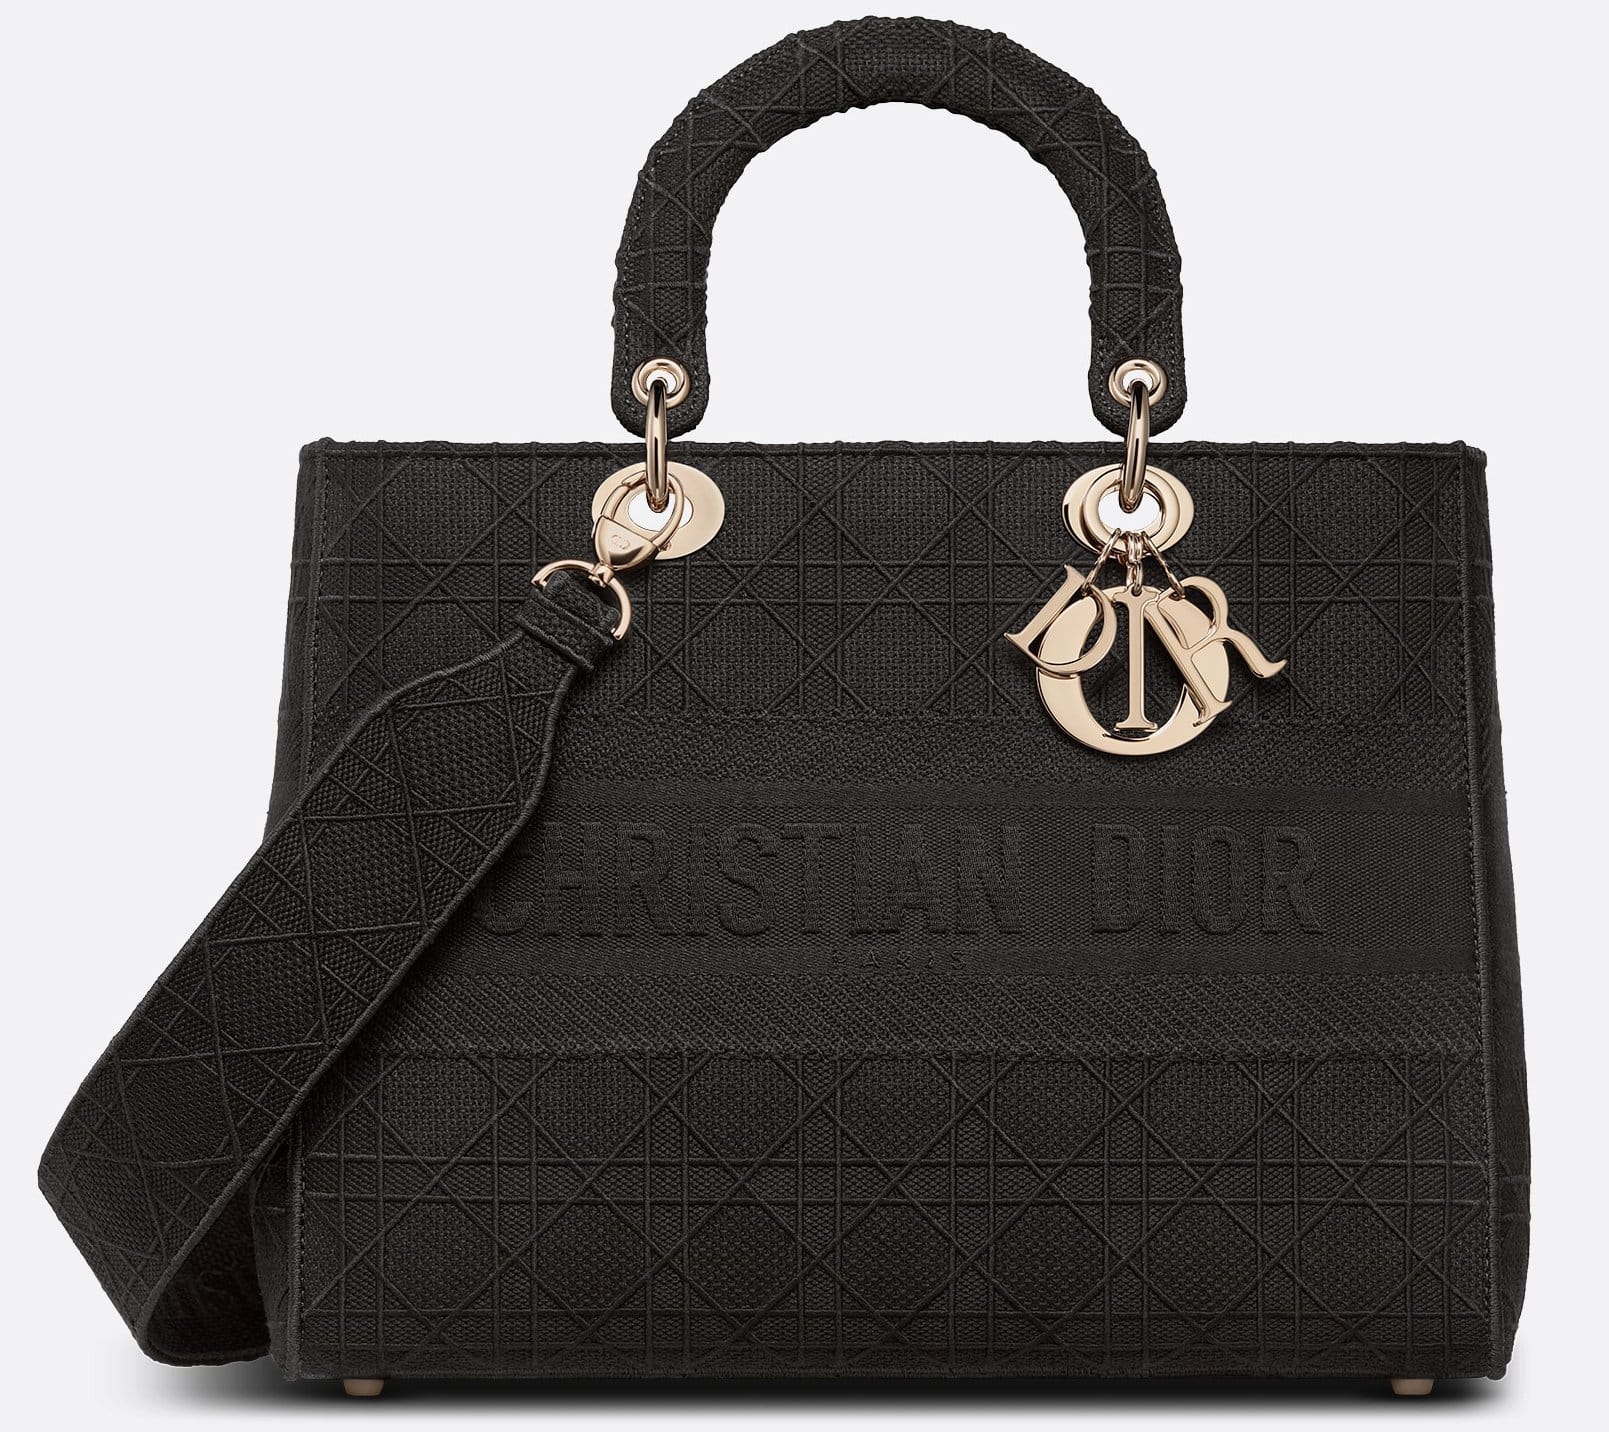 Combining classic elegance with modernity, the Lady D-Lite bag is fully embroidered with a black Cannage motif and has a Christian Dior embroidery across the front